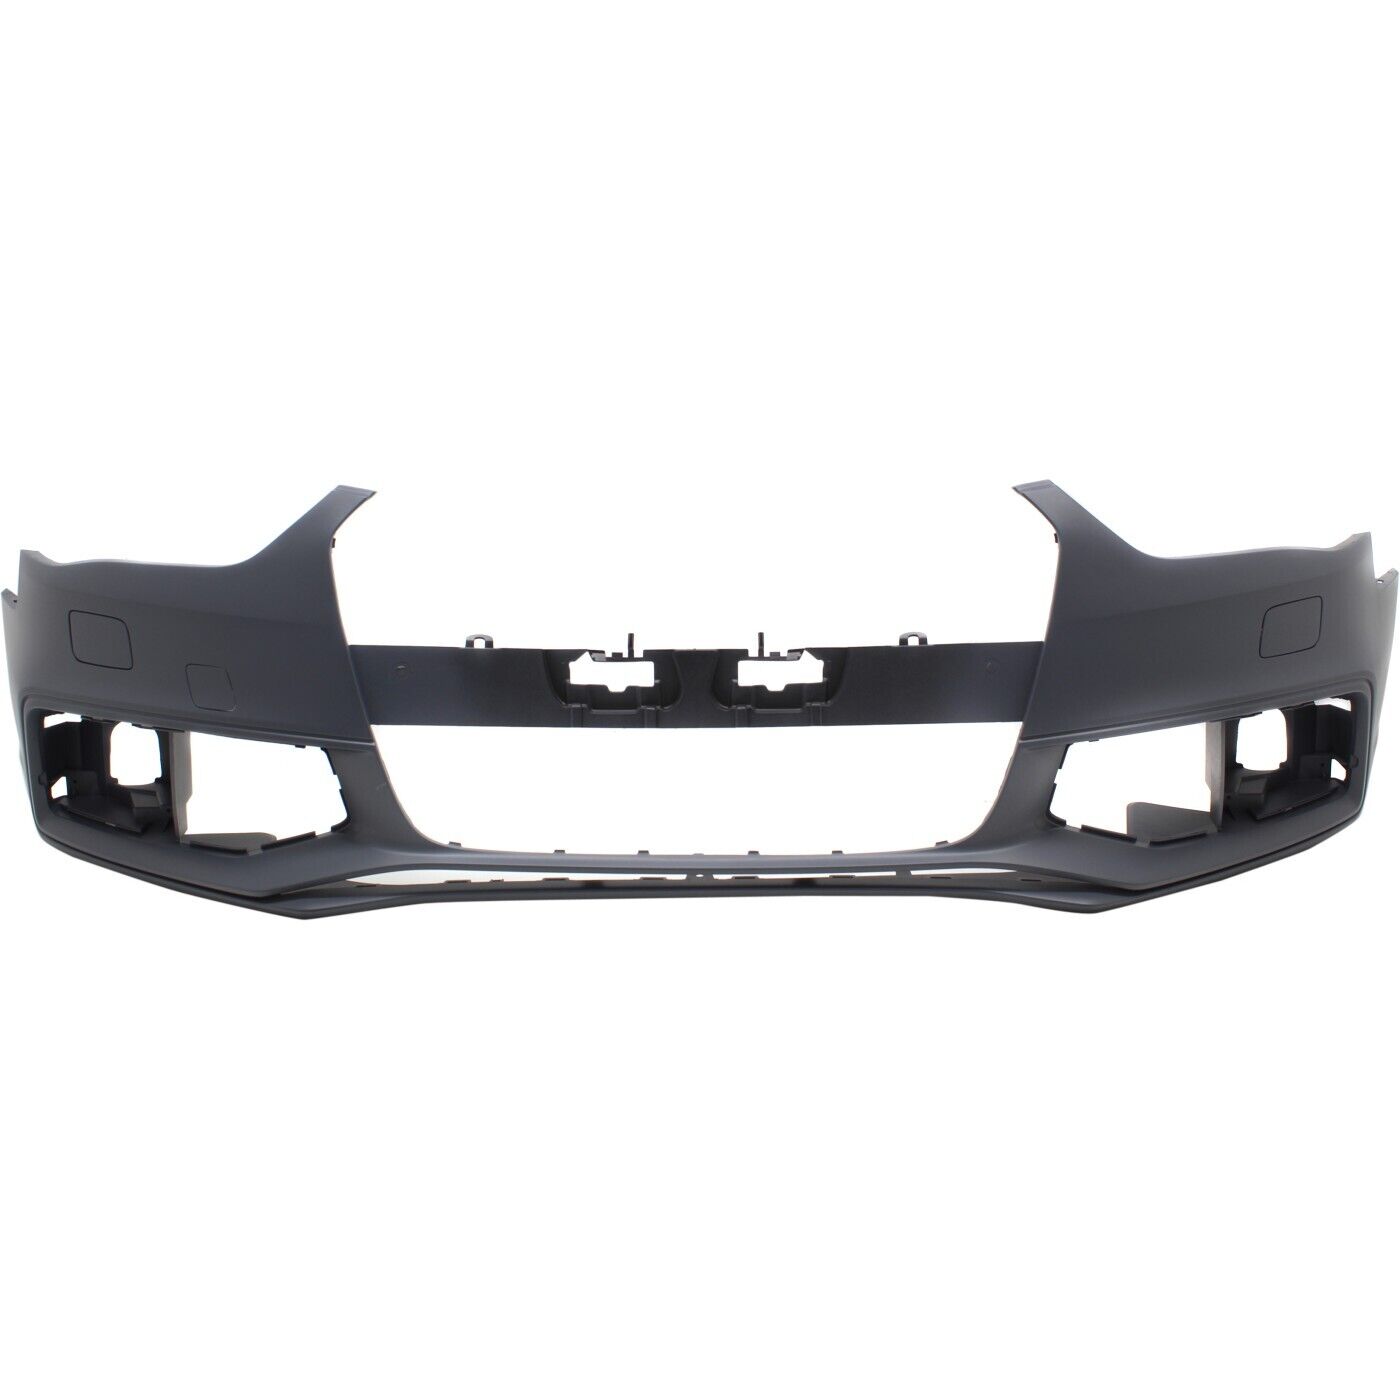 Front Bumper Cover For 2013-16 Audi A4/S4/A4 Quattro with S-Line Package Primed